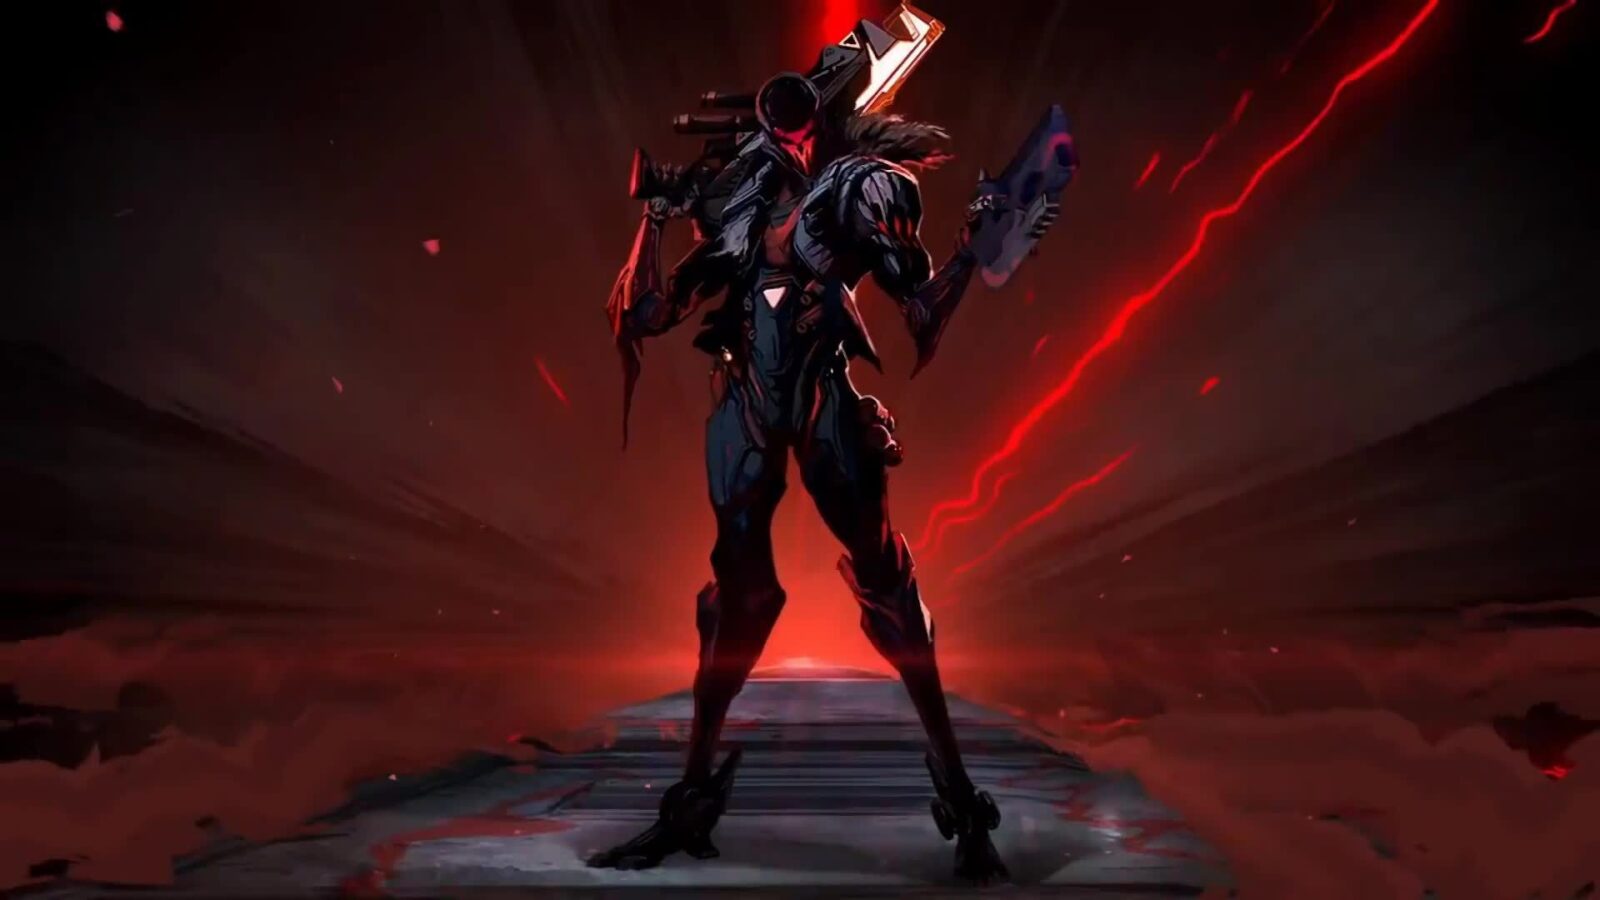 LiveWallpapers4Free.com | Project Jhin League Of Legends - Free Animated Wallpaper